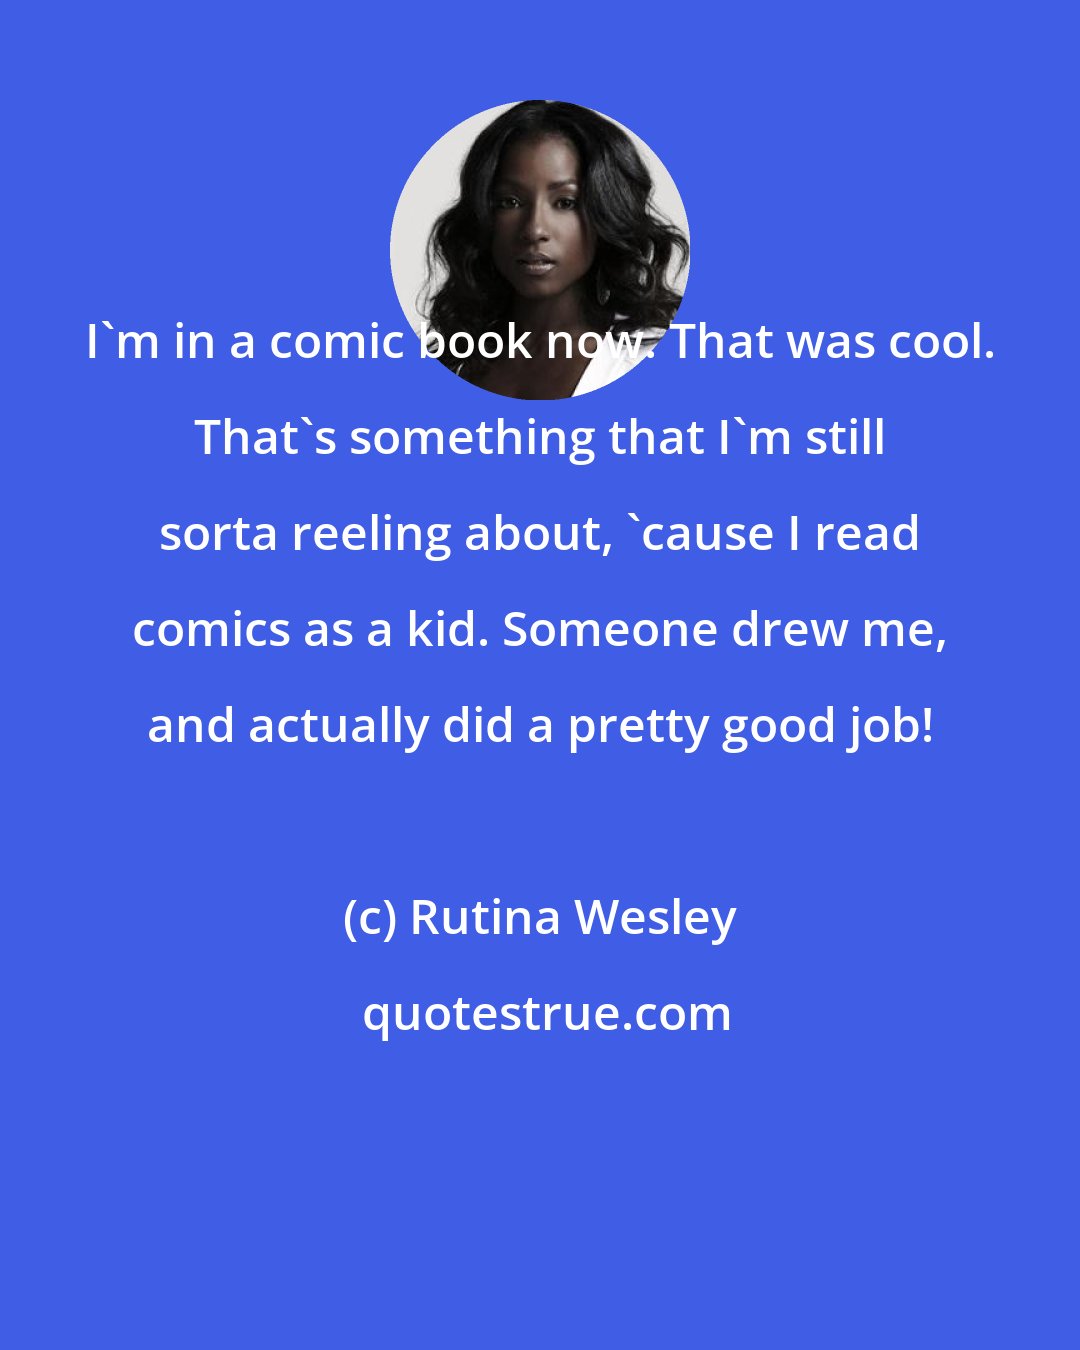 Rutina Wesley: I'm in a comic book now. That was cool. That's something that I'm still sorta reeling about, 'cause I read comics as a kid. Someone drew me, and actually did a pretty good job!